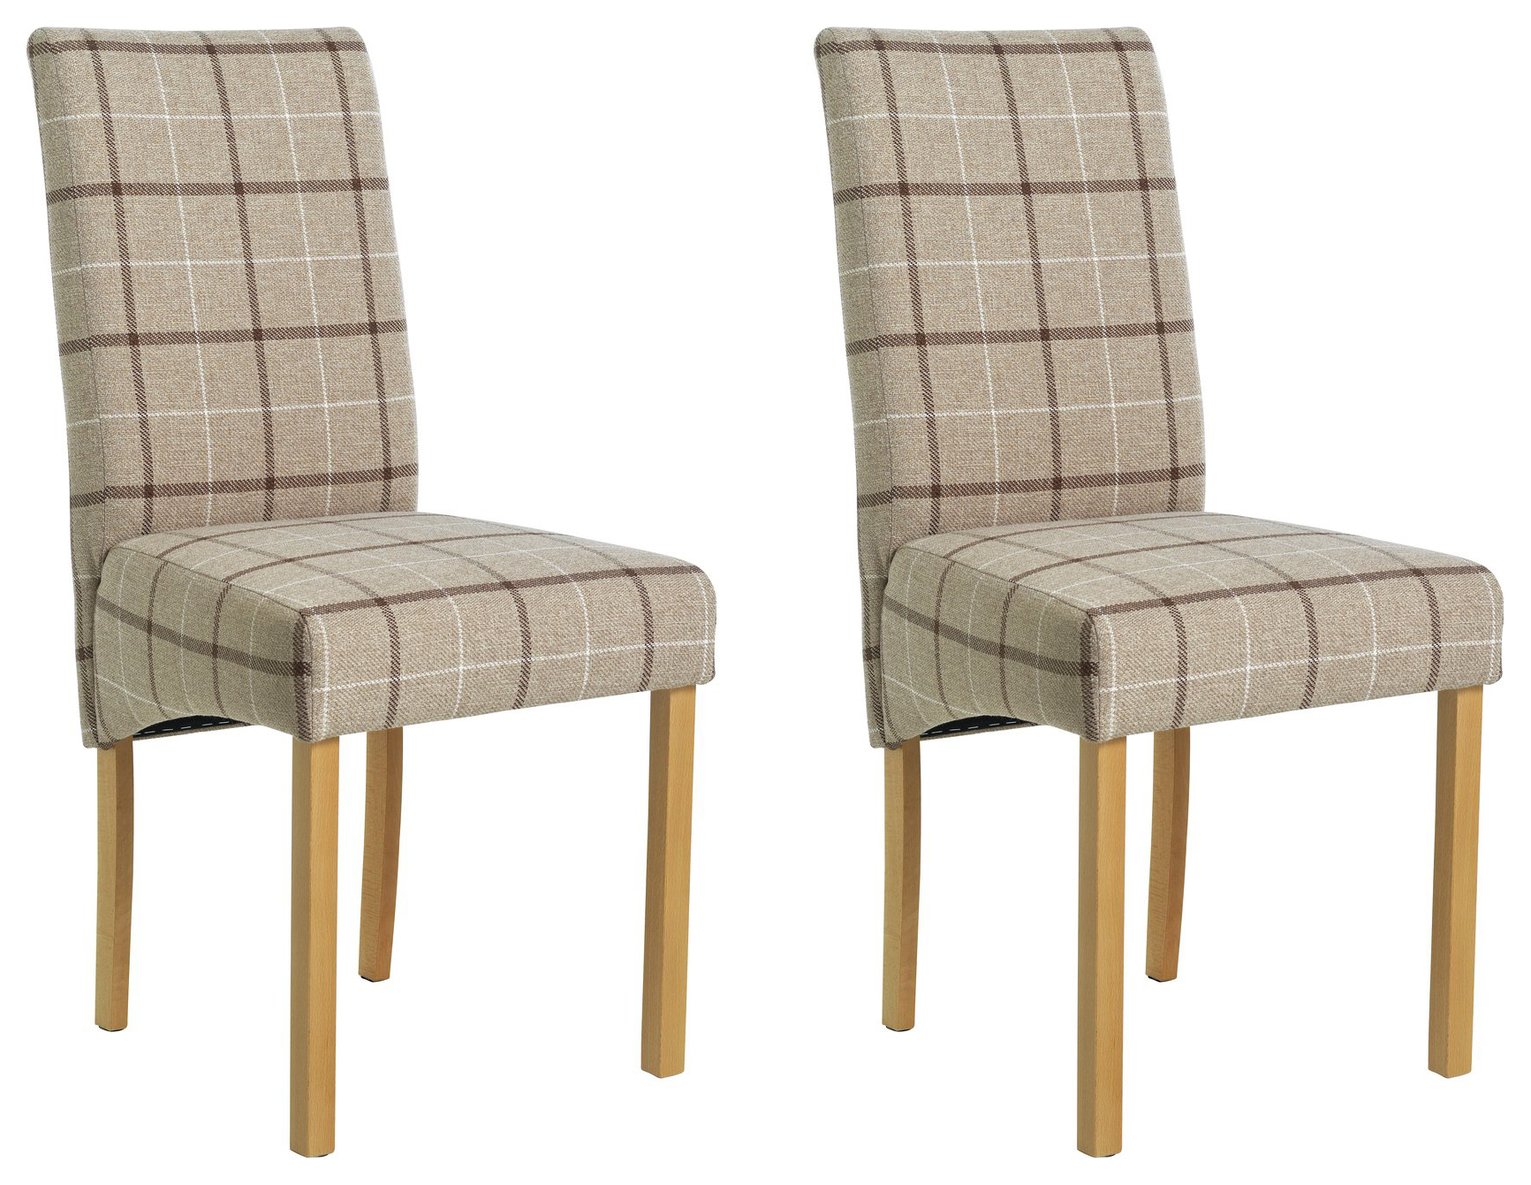 Argos Home Pair of Fabric Skirted Chairs - Mink Check